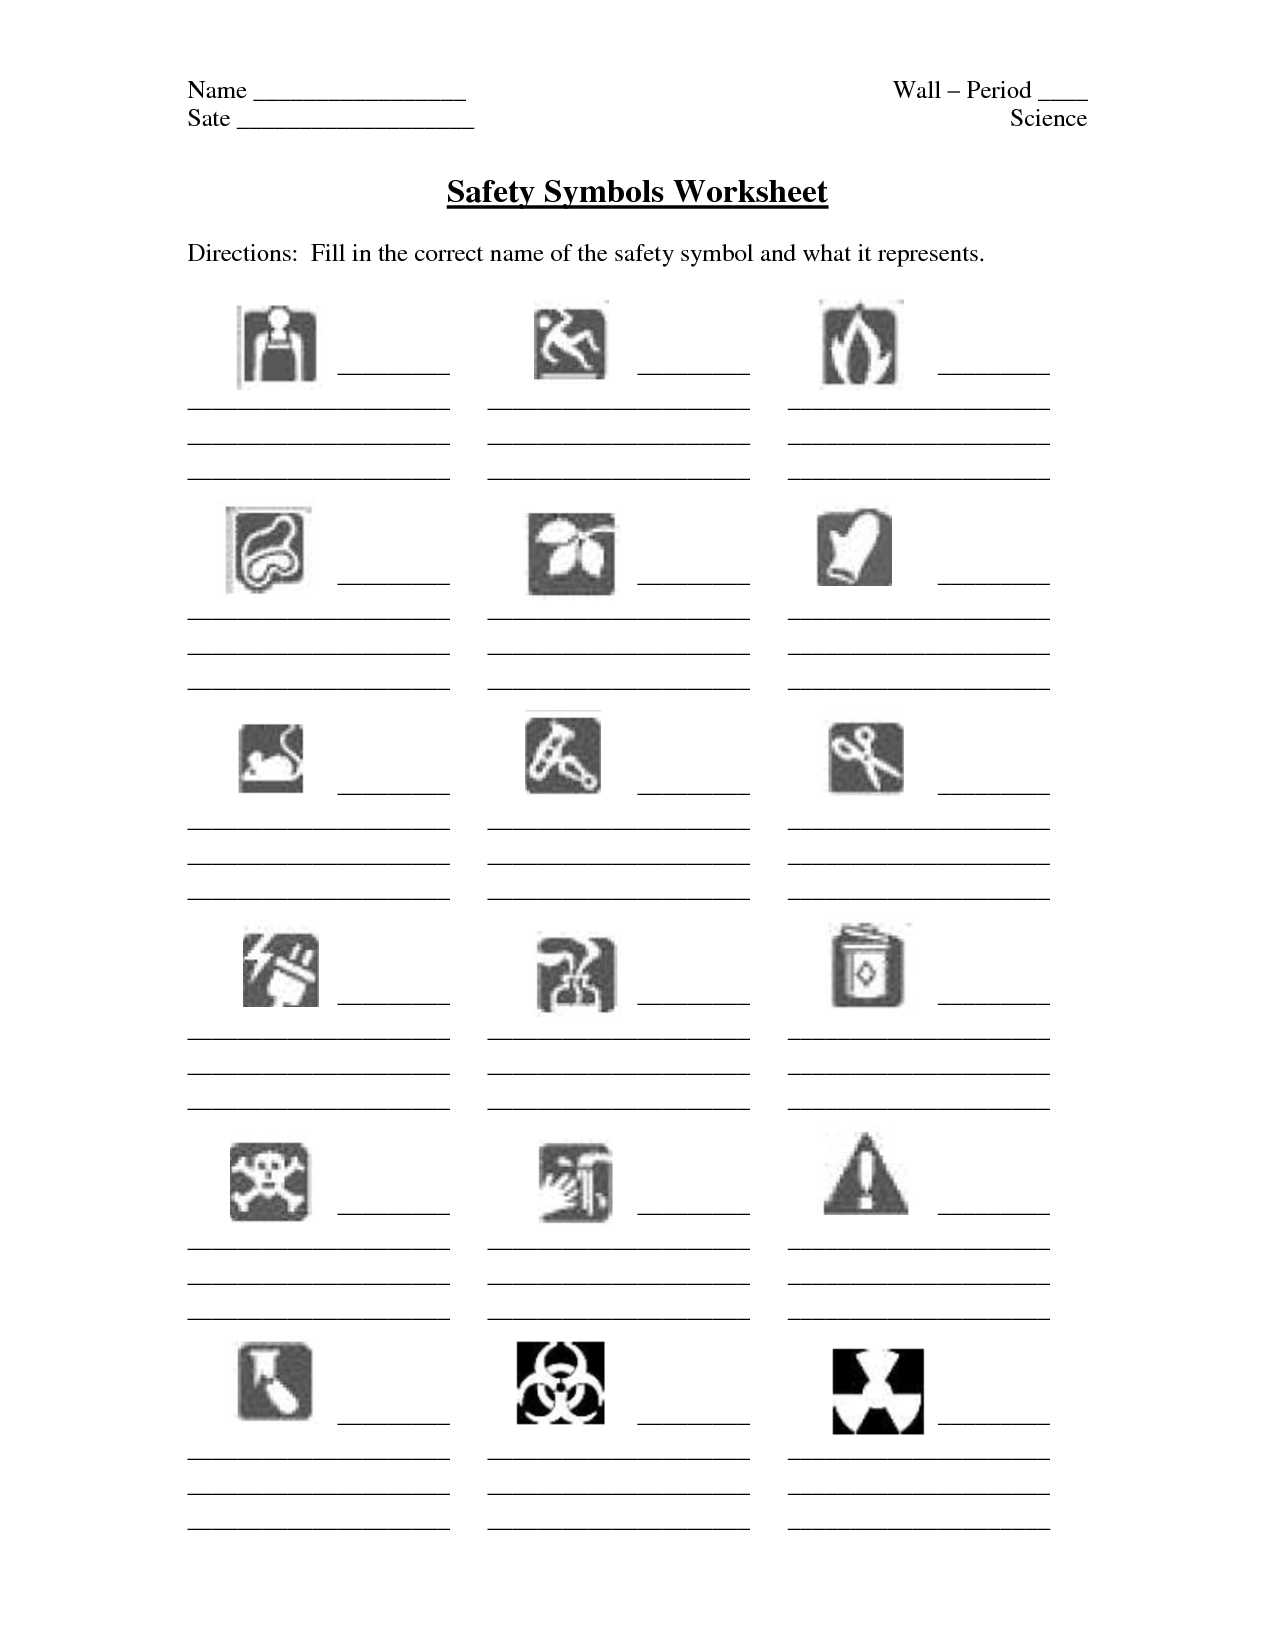 Review and Reinforce Worksheet Answers or Science Safety Symbols Worksheet